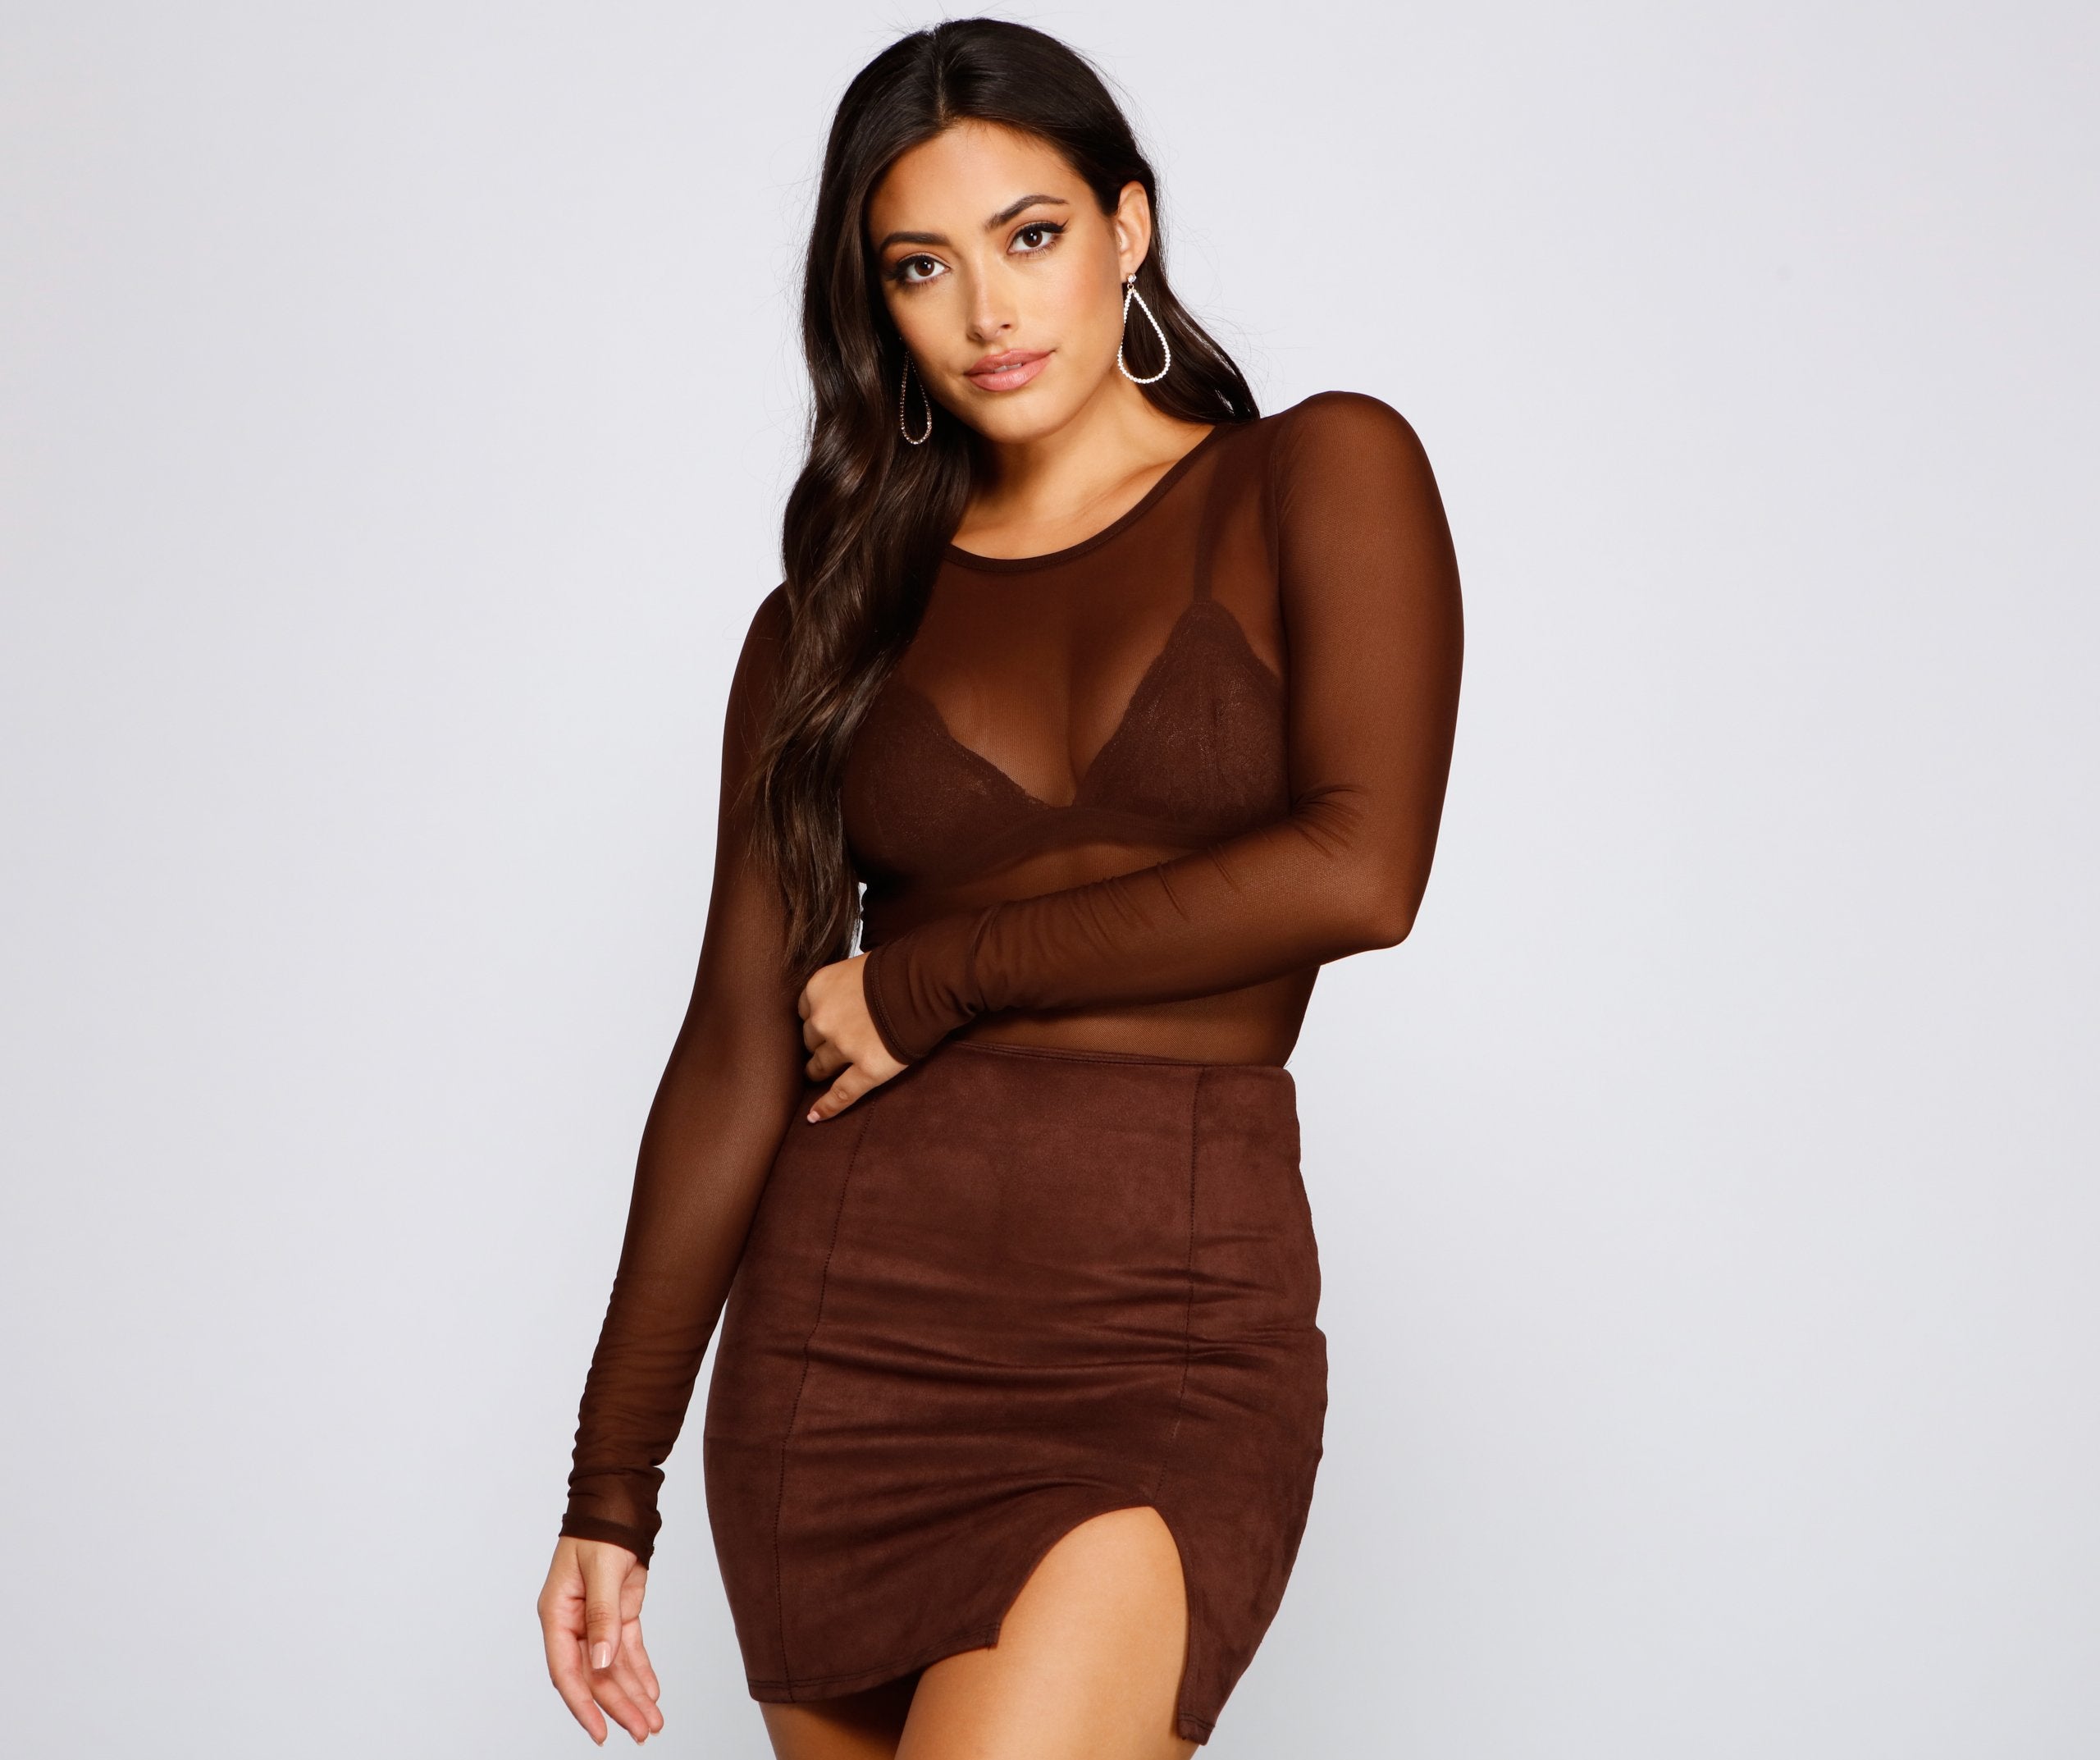 Love's A Mesh Bodysuit - Lady Occasions